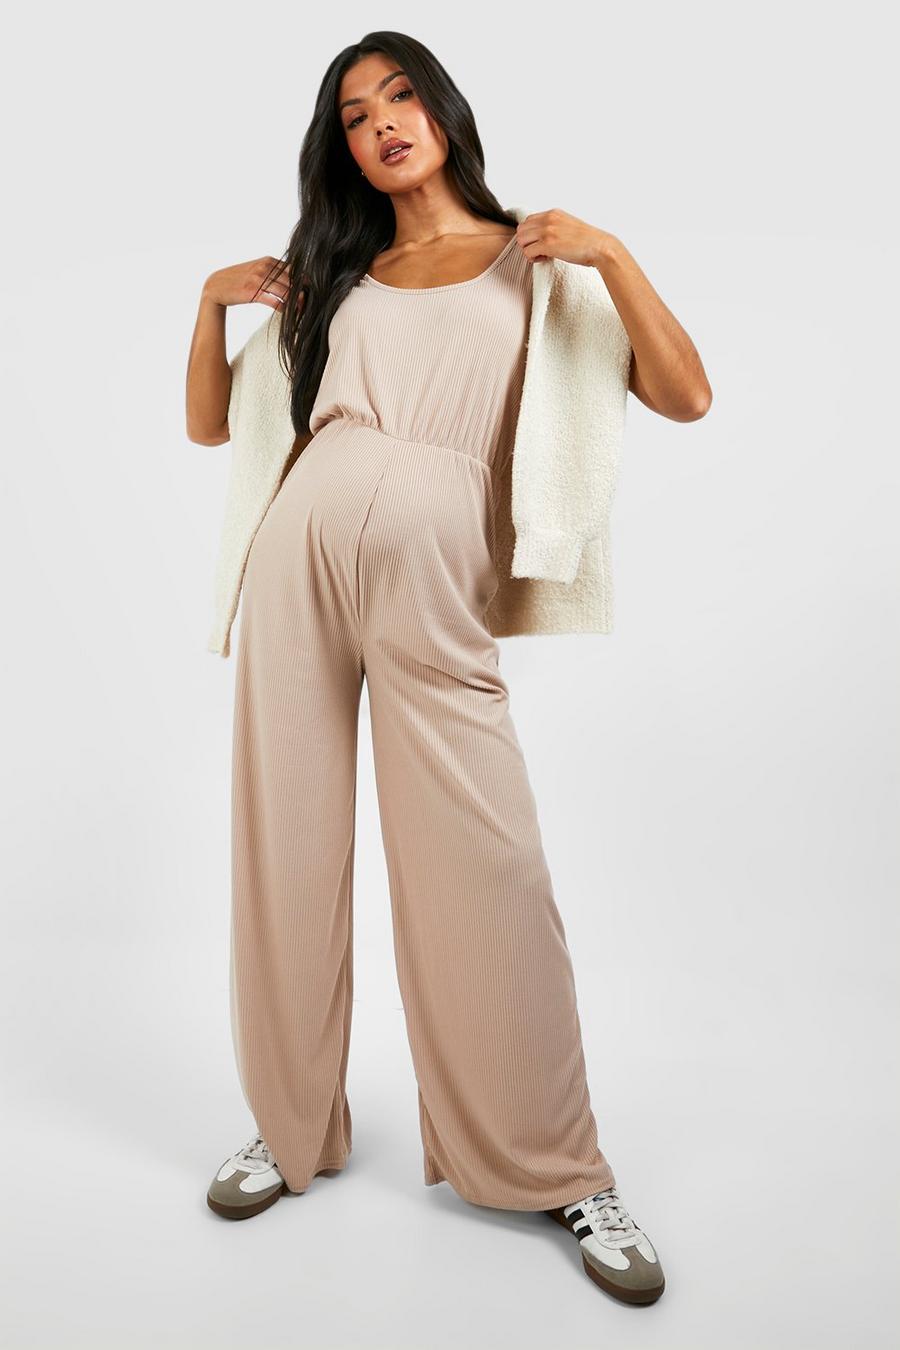 Stone Maternity Jumpsuits & Playsuits